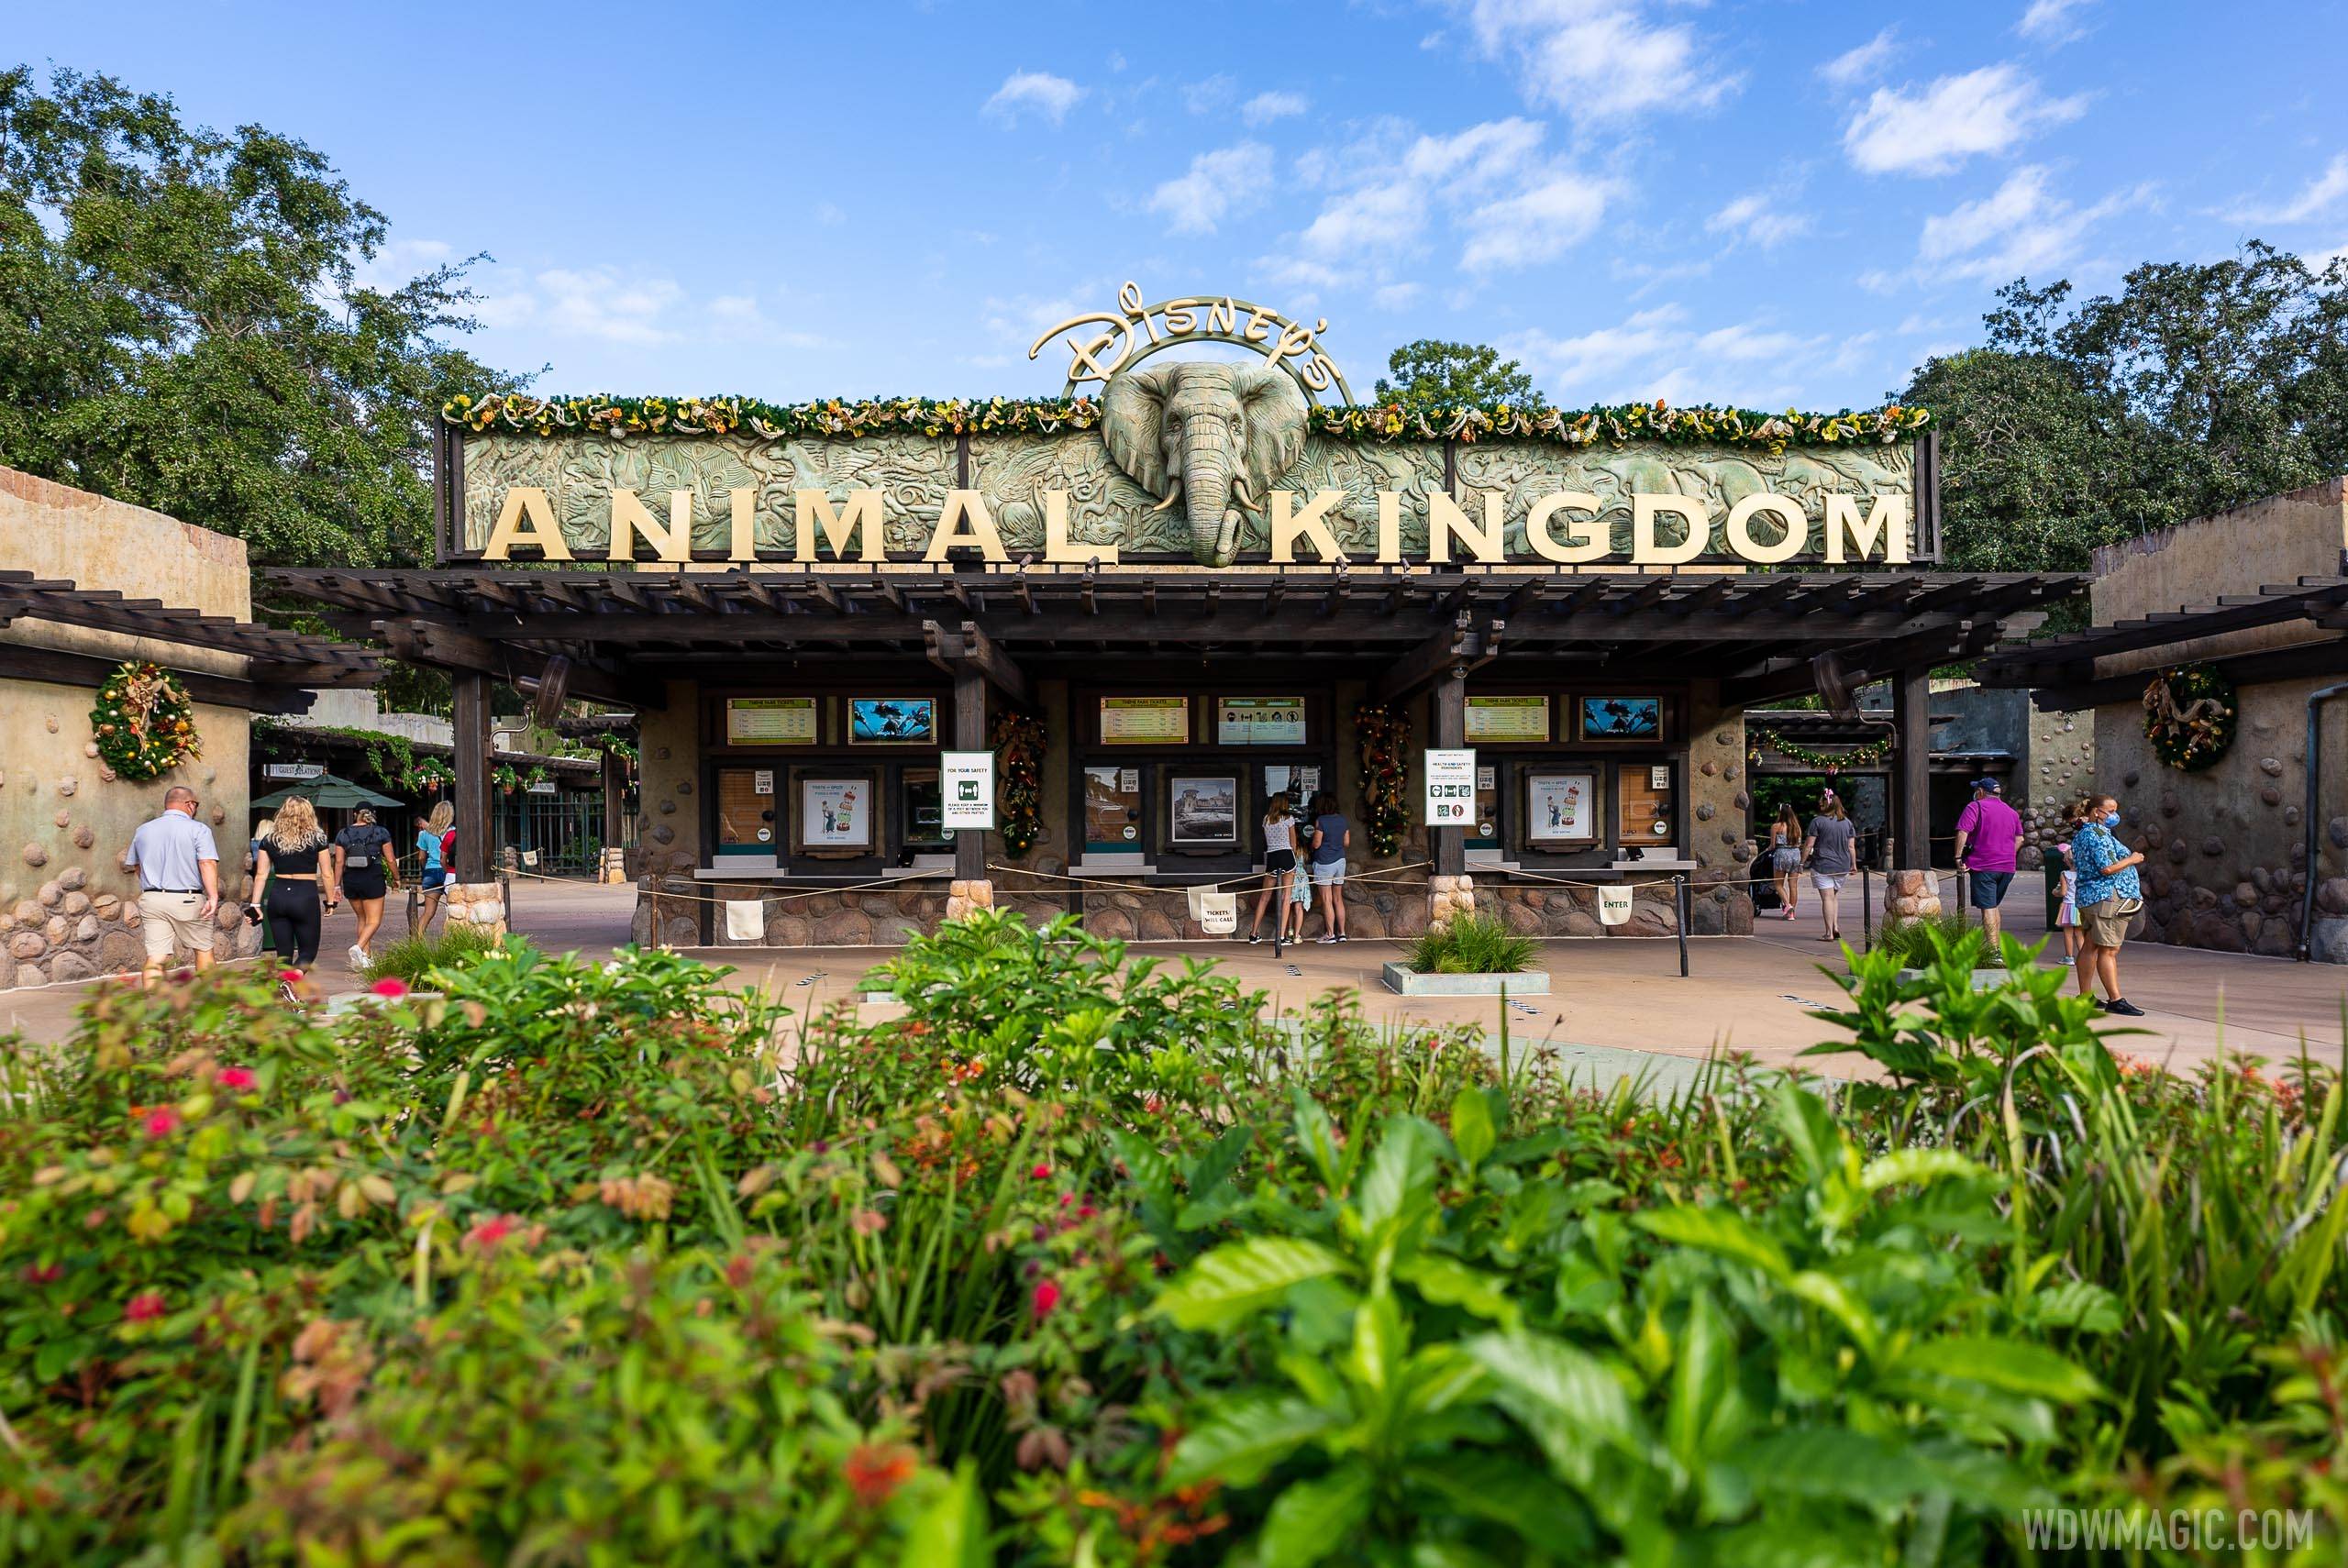 Disney's Animal Kingdom now has many days opening until 8pm during November